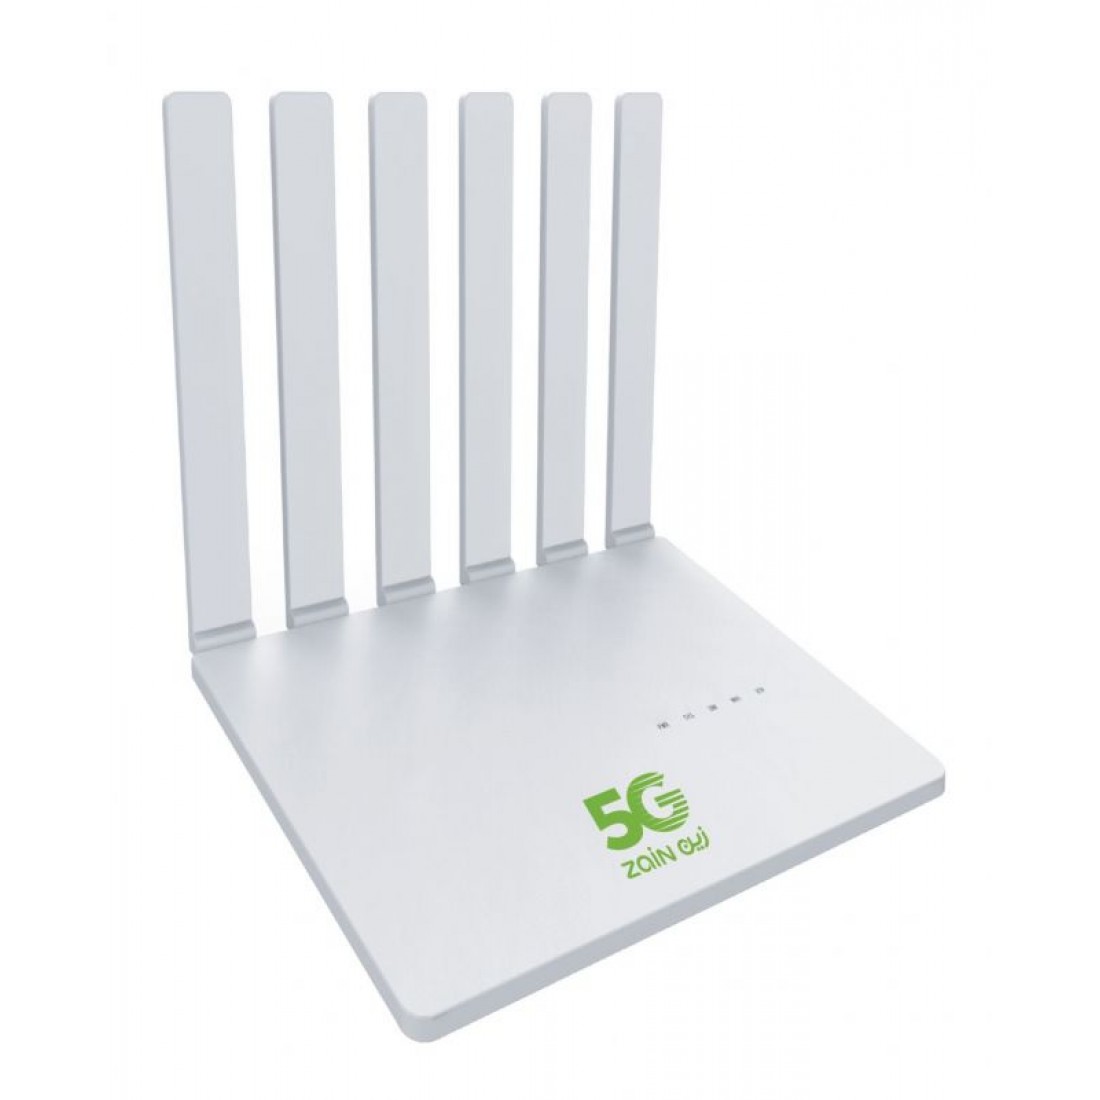 Home Router 5G Green Packet D5H 5G CPE only supports stc